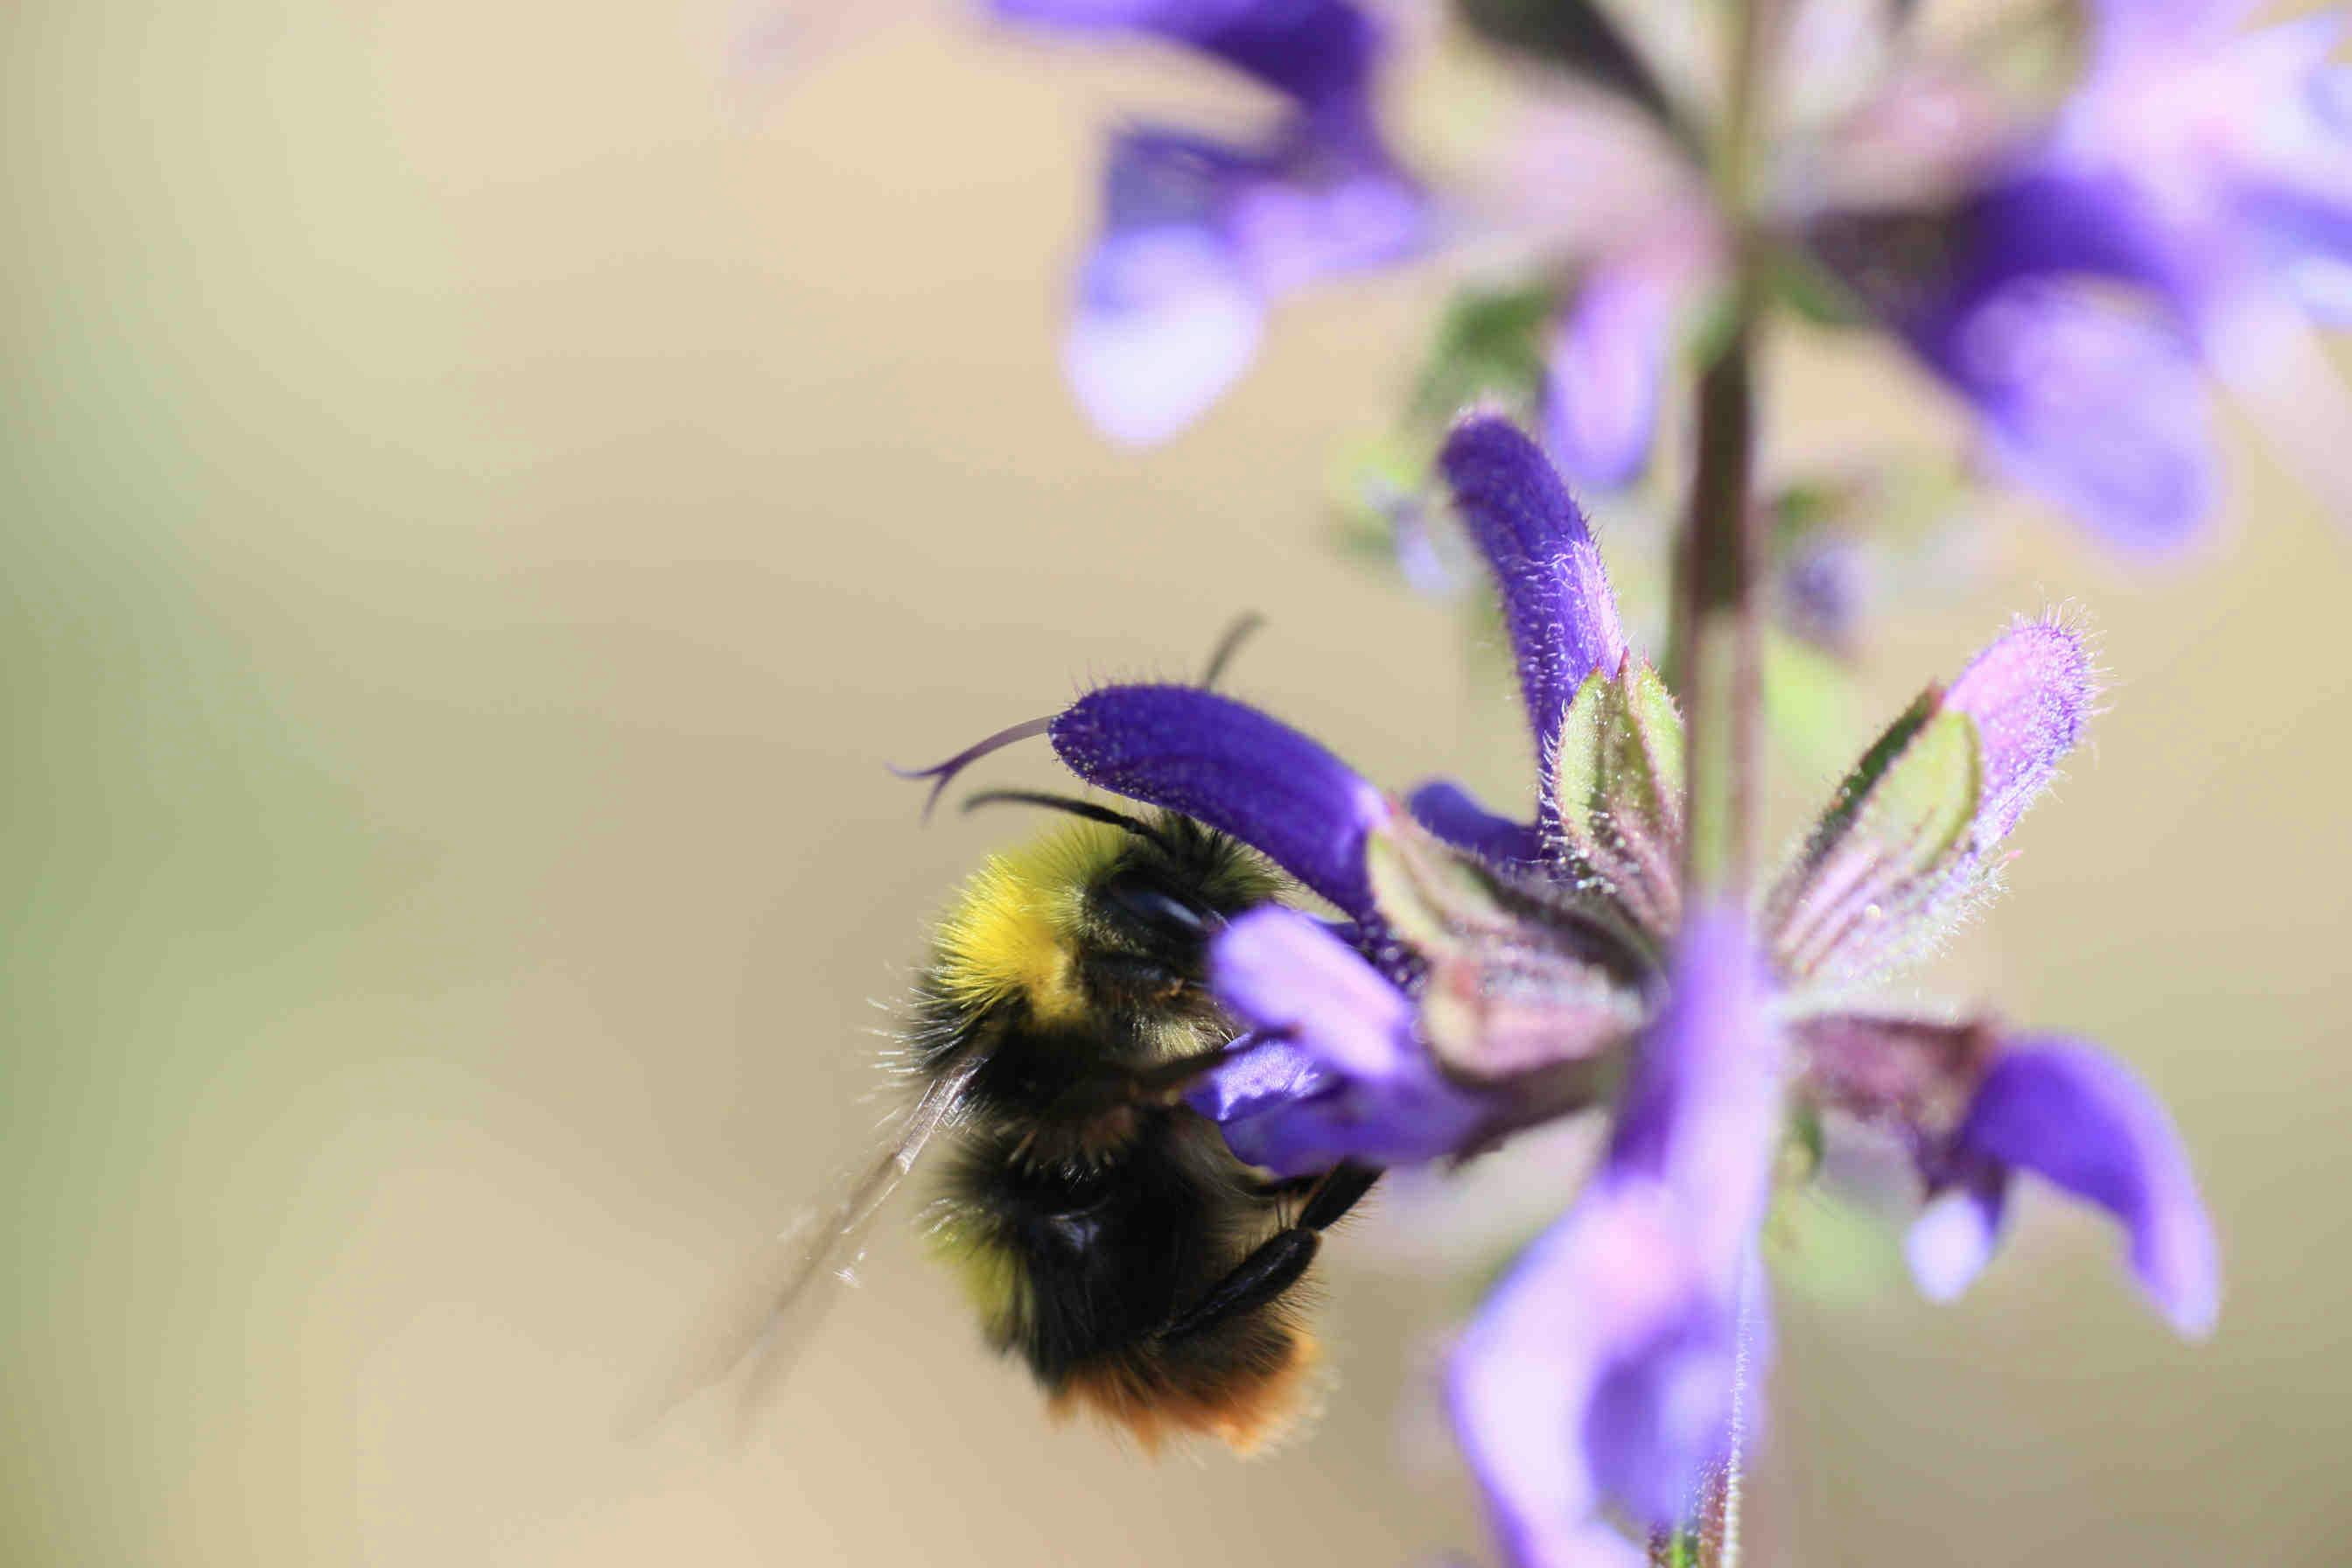 Bumblebee Conservation: The Threats